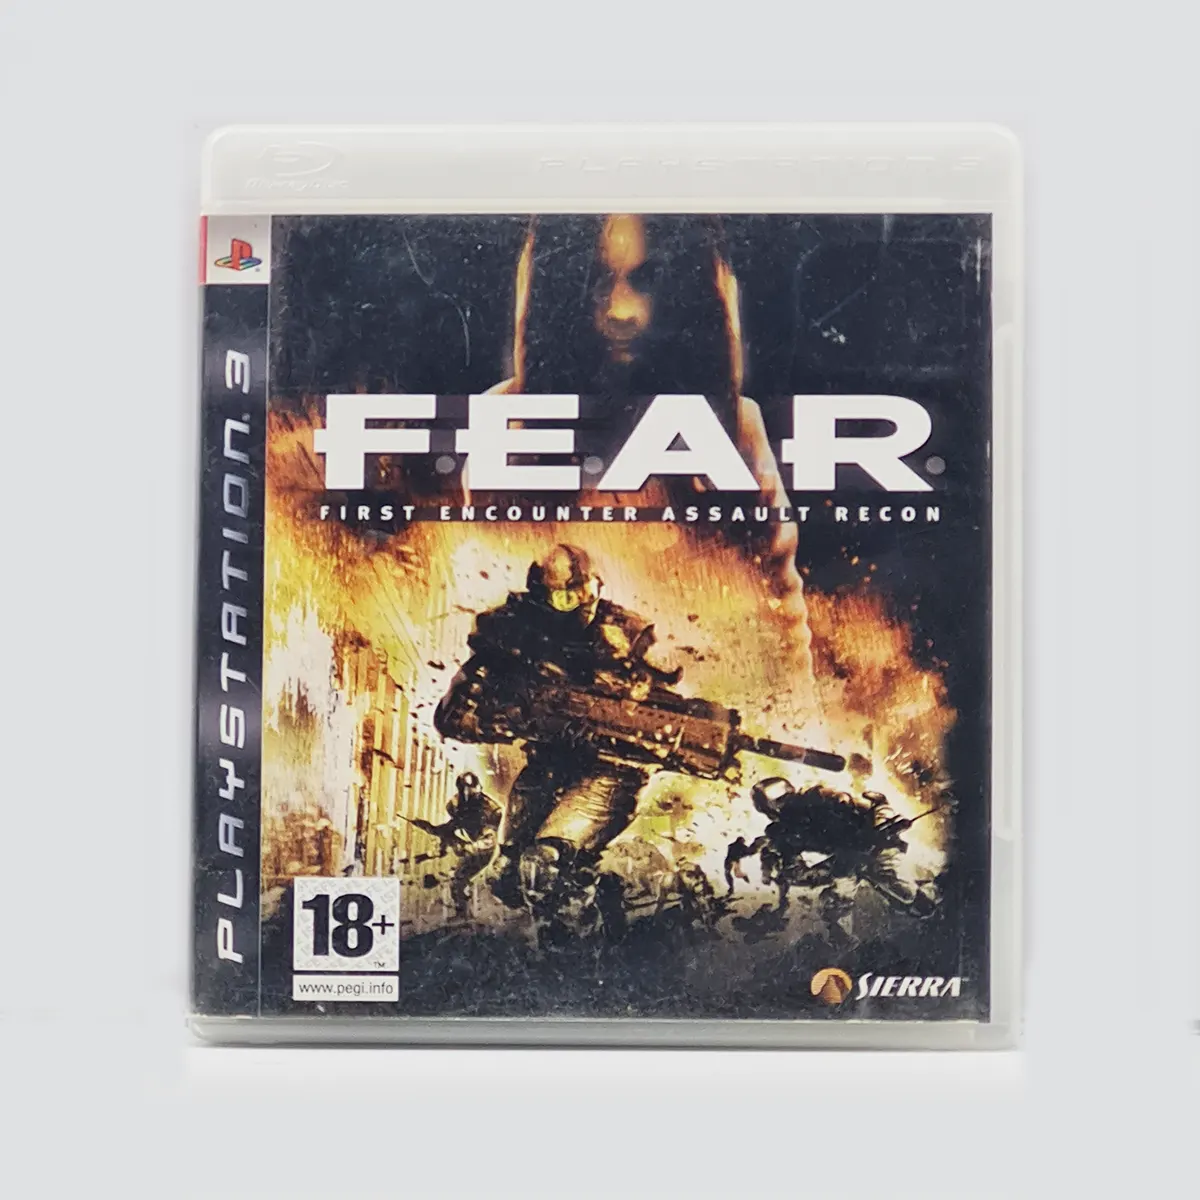 FEAR PS3